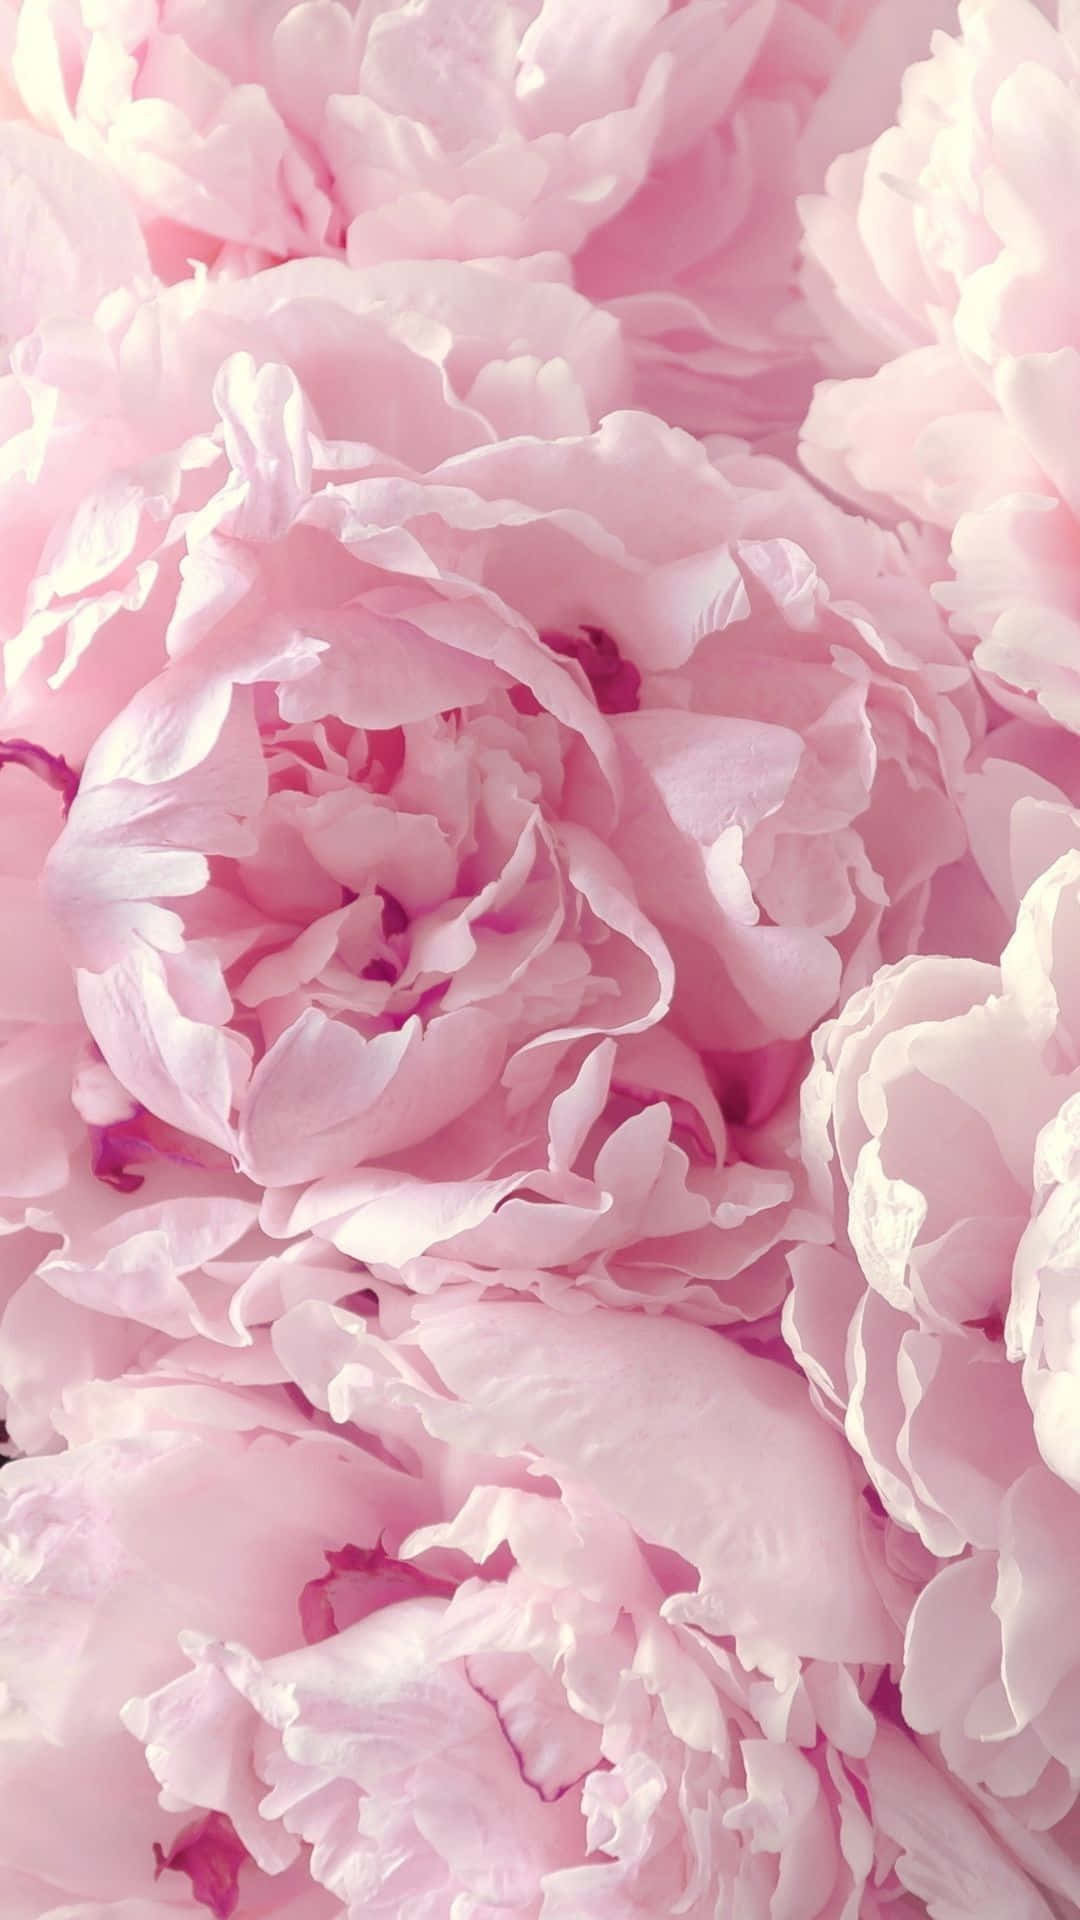 Pink Peonies In A Close Up View Wallpaper